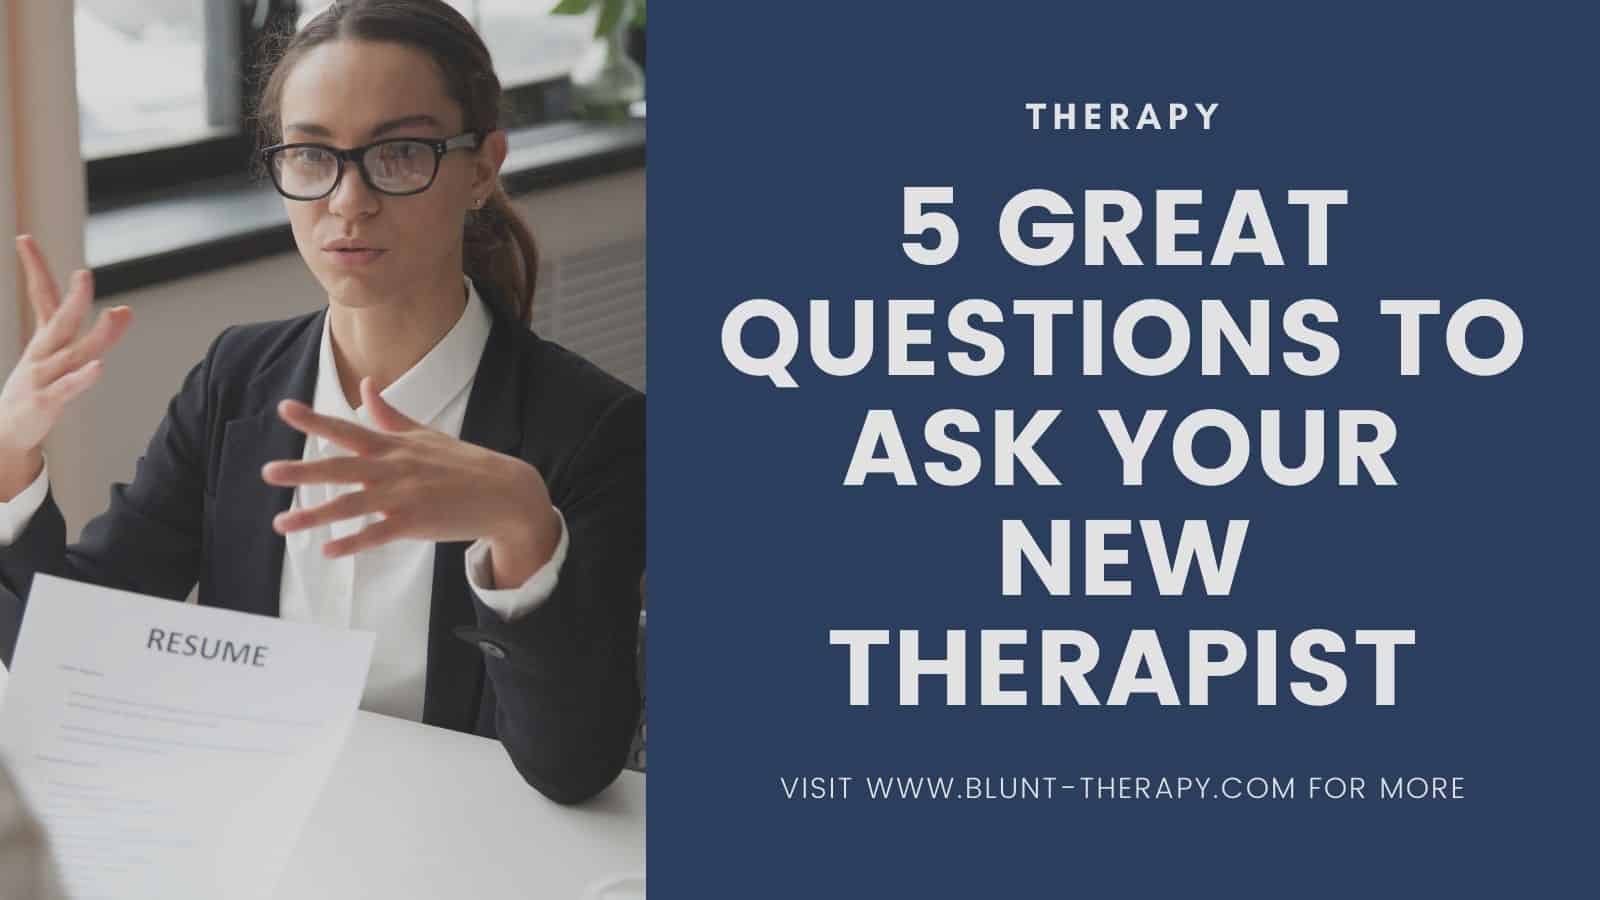 5 Great Questions To Ask Your New Therapist